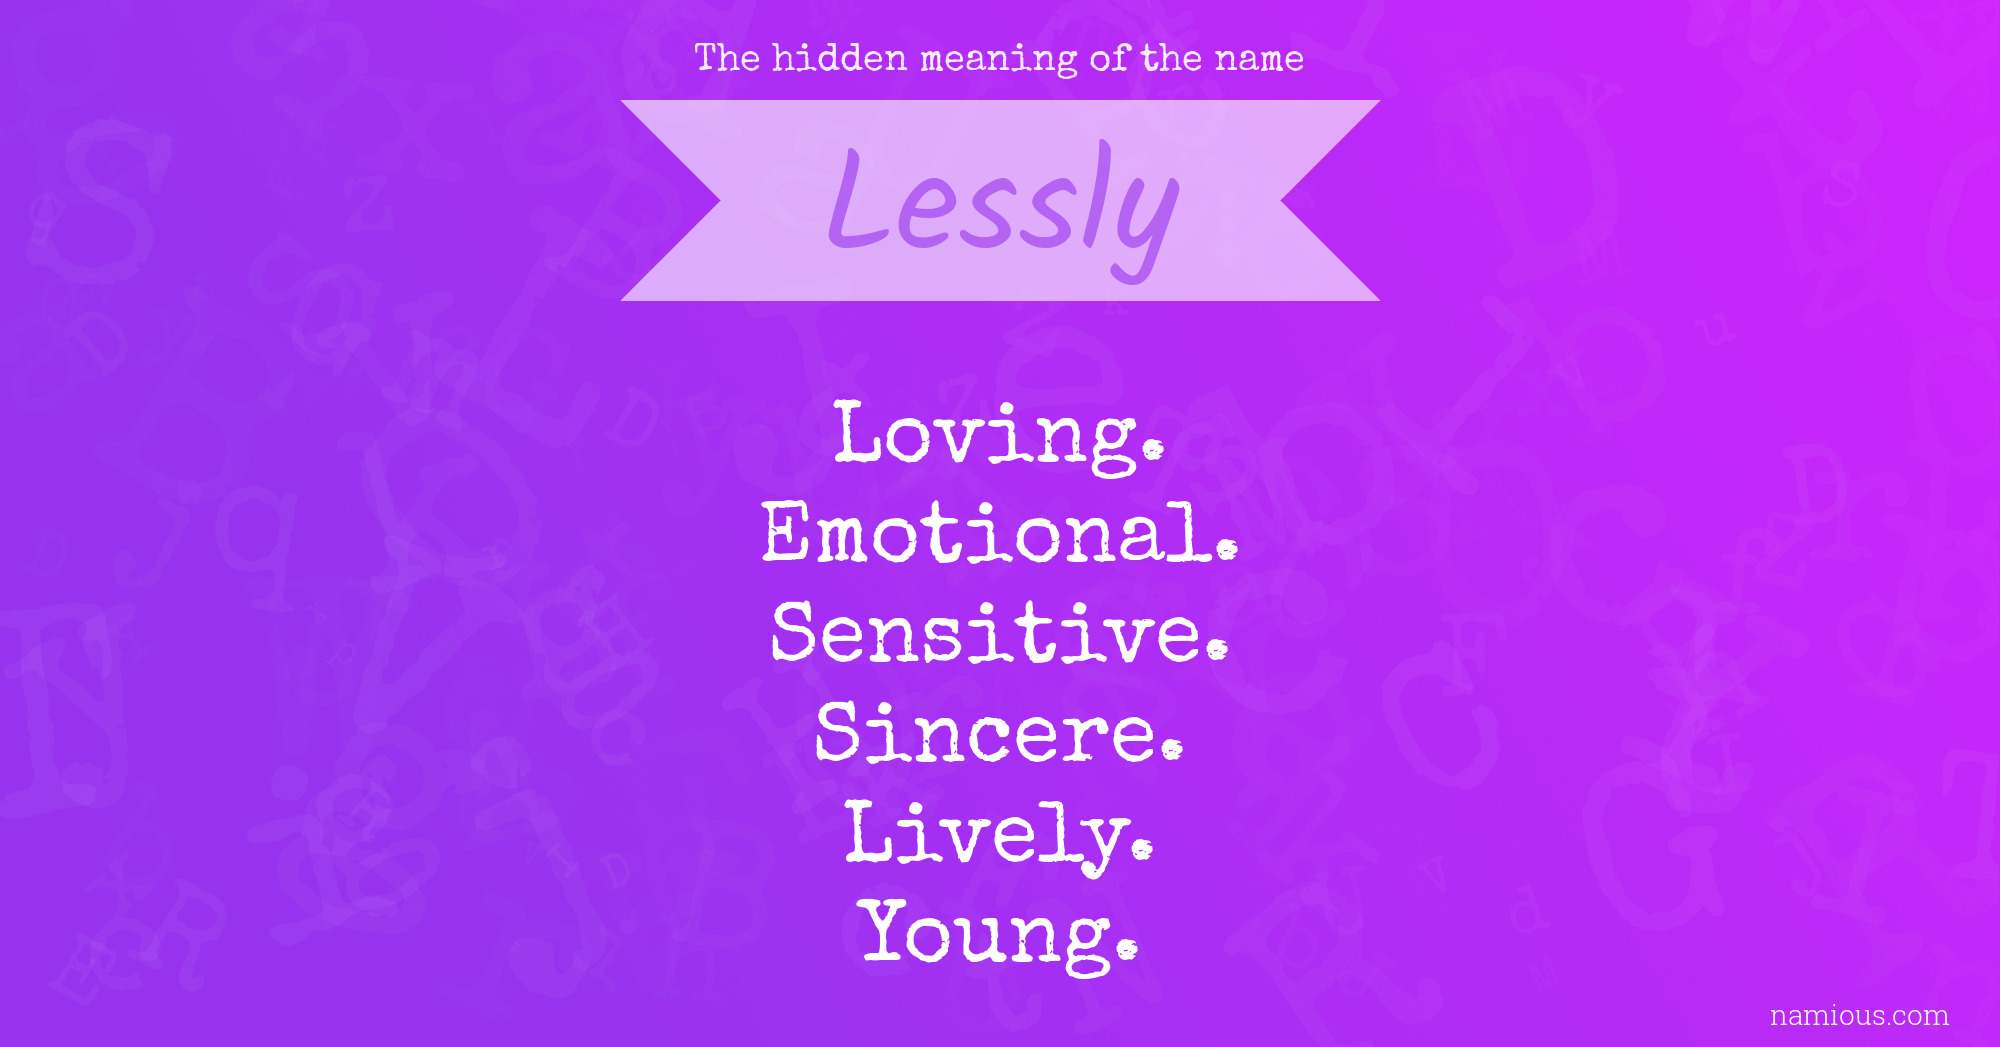 The hidden meaning of the name Lessly